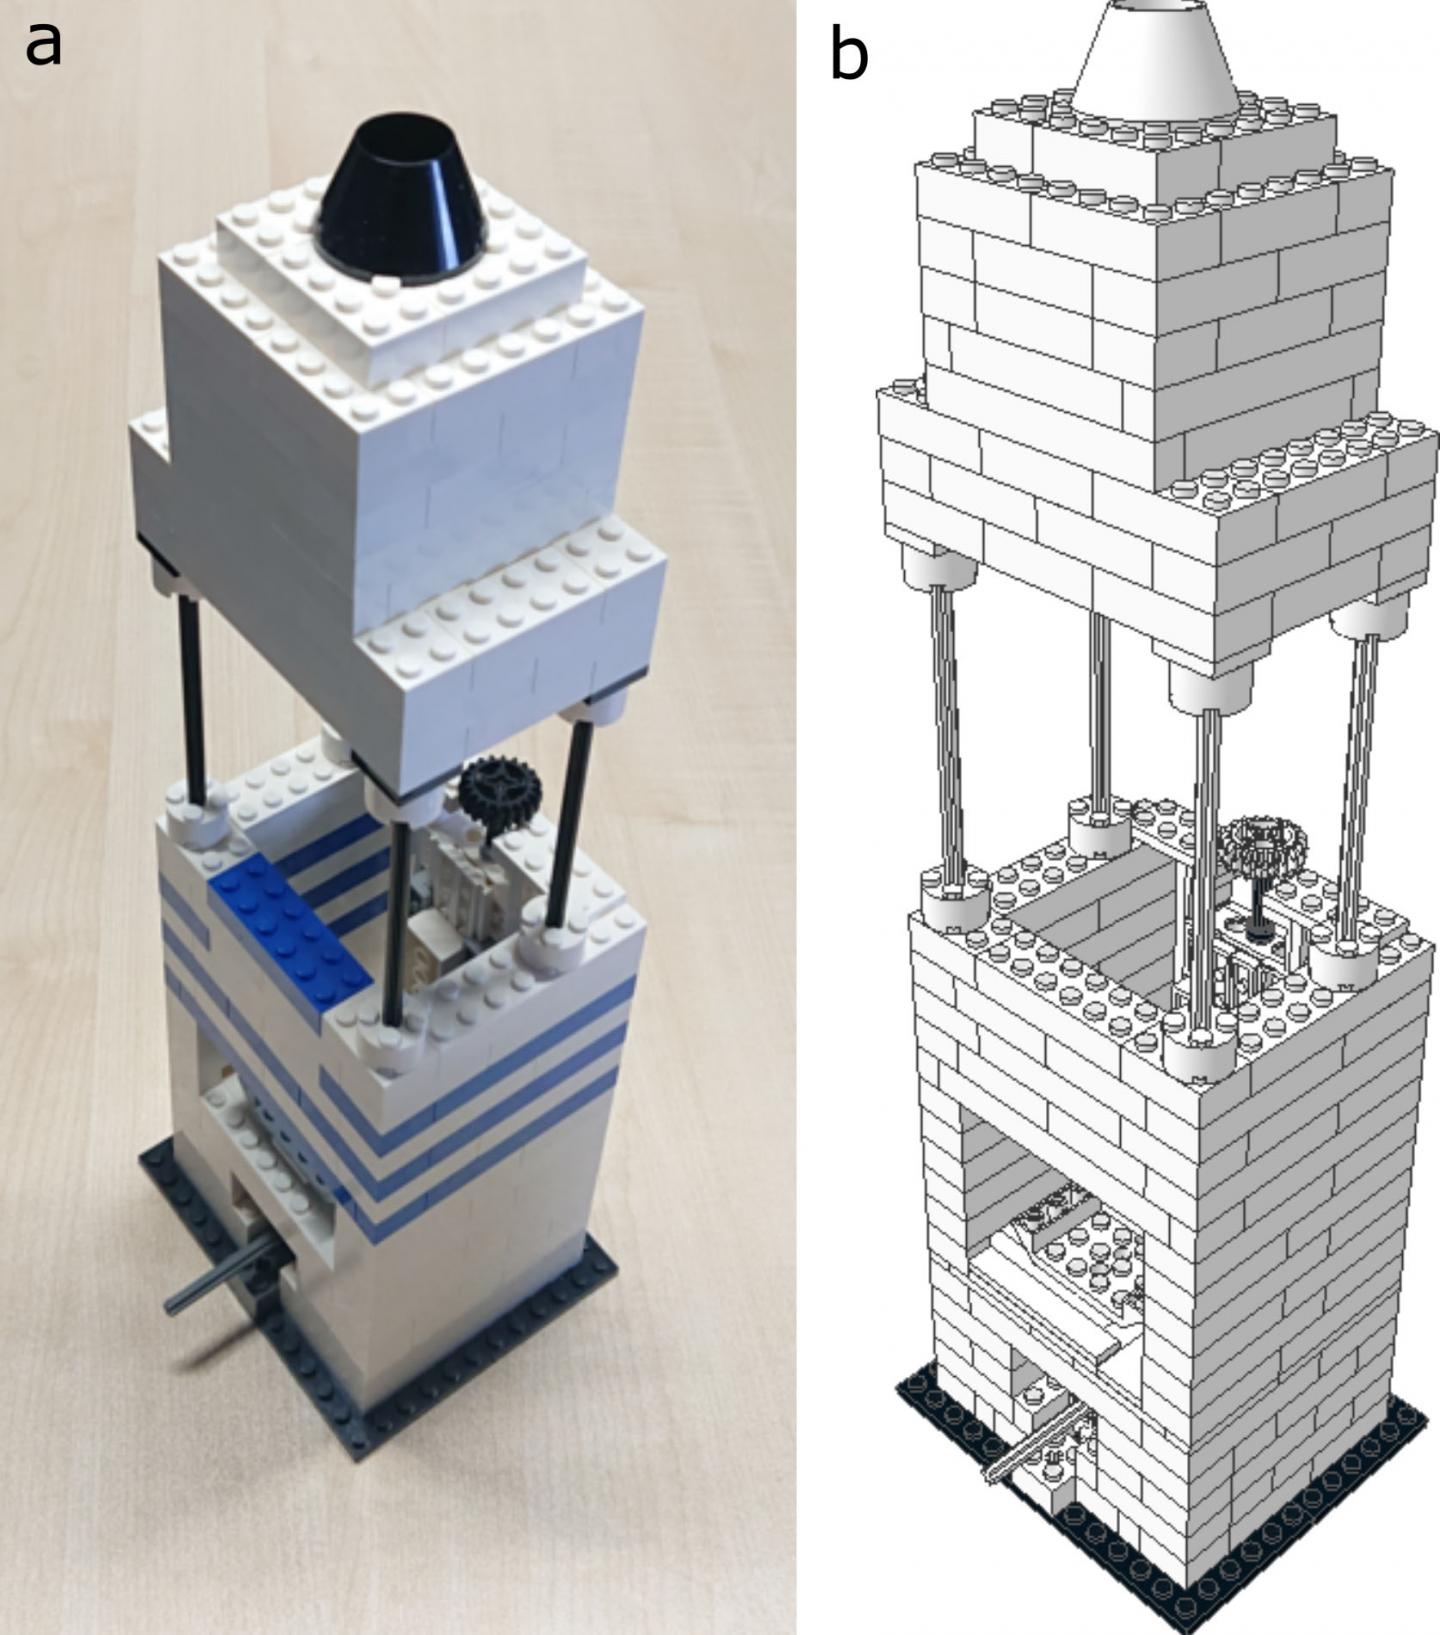 Lego microscope and instructions to build it